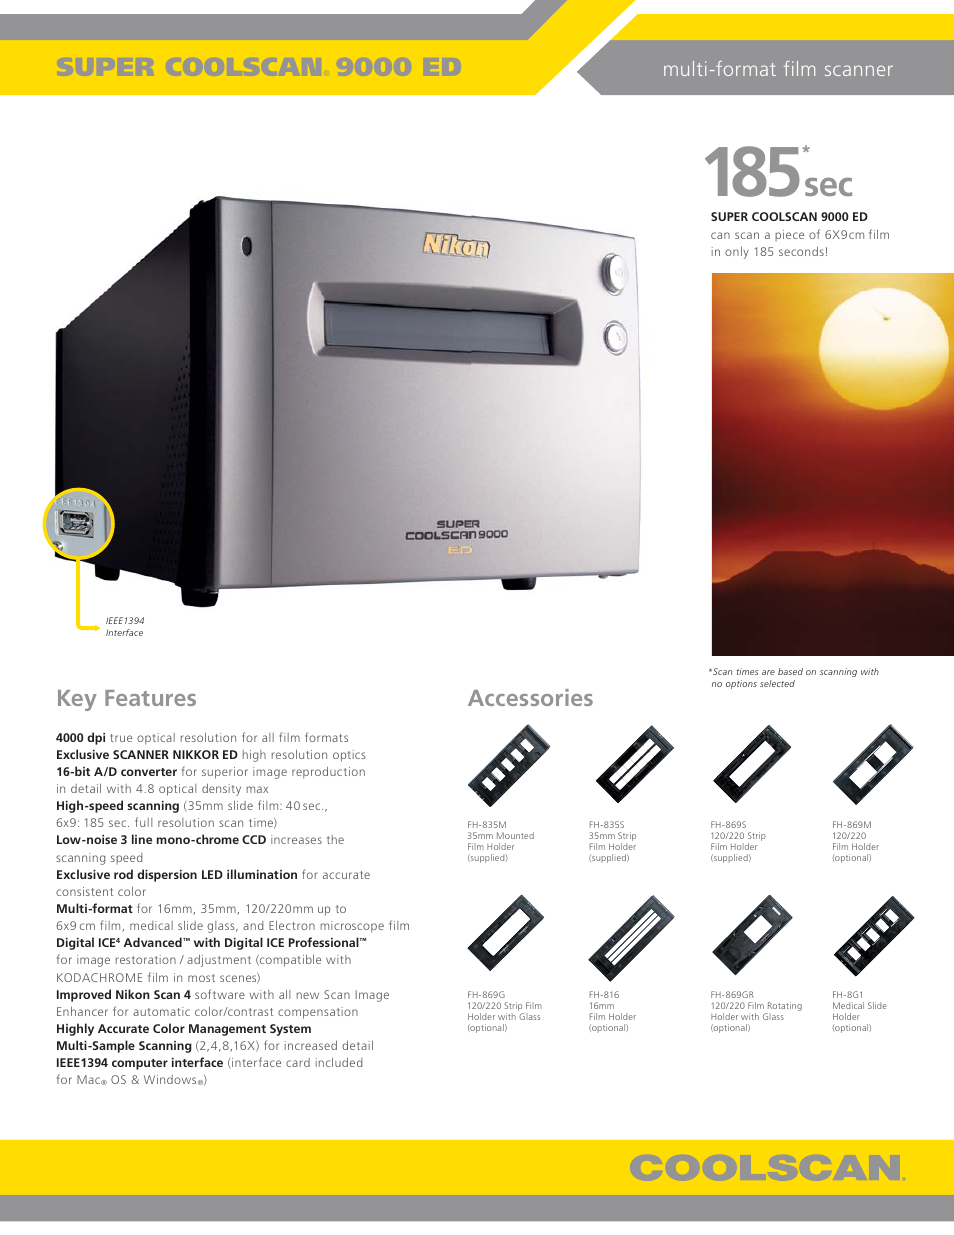 Super coolscan, 9000 ed, Key features | Nikon 9000 ED User Manual | Page 3  / 8